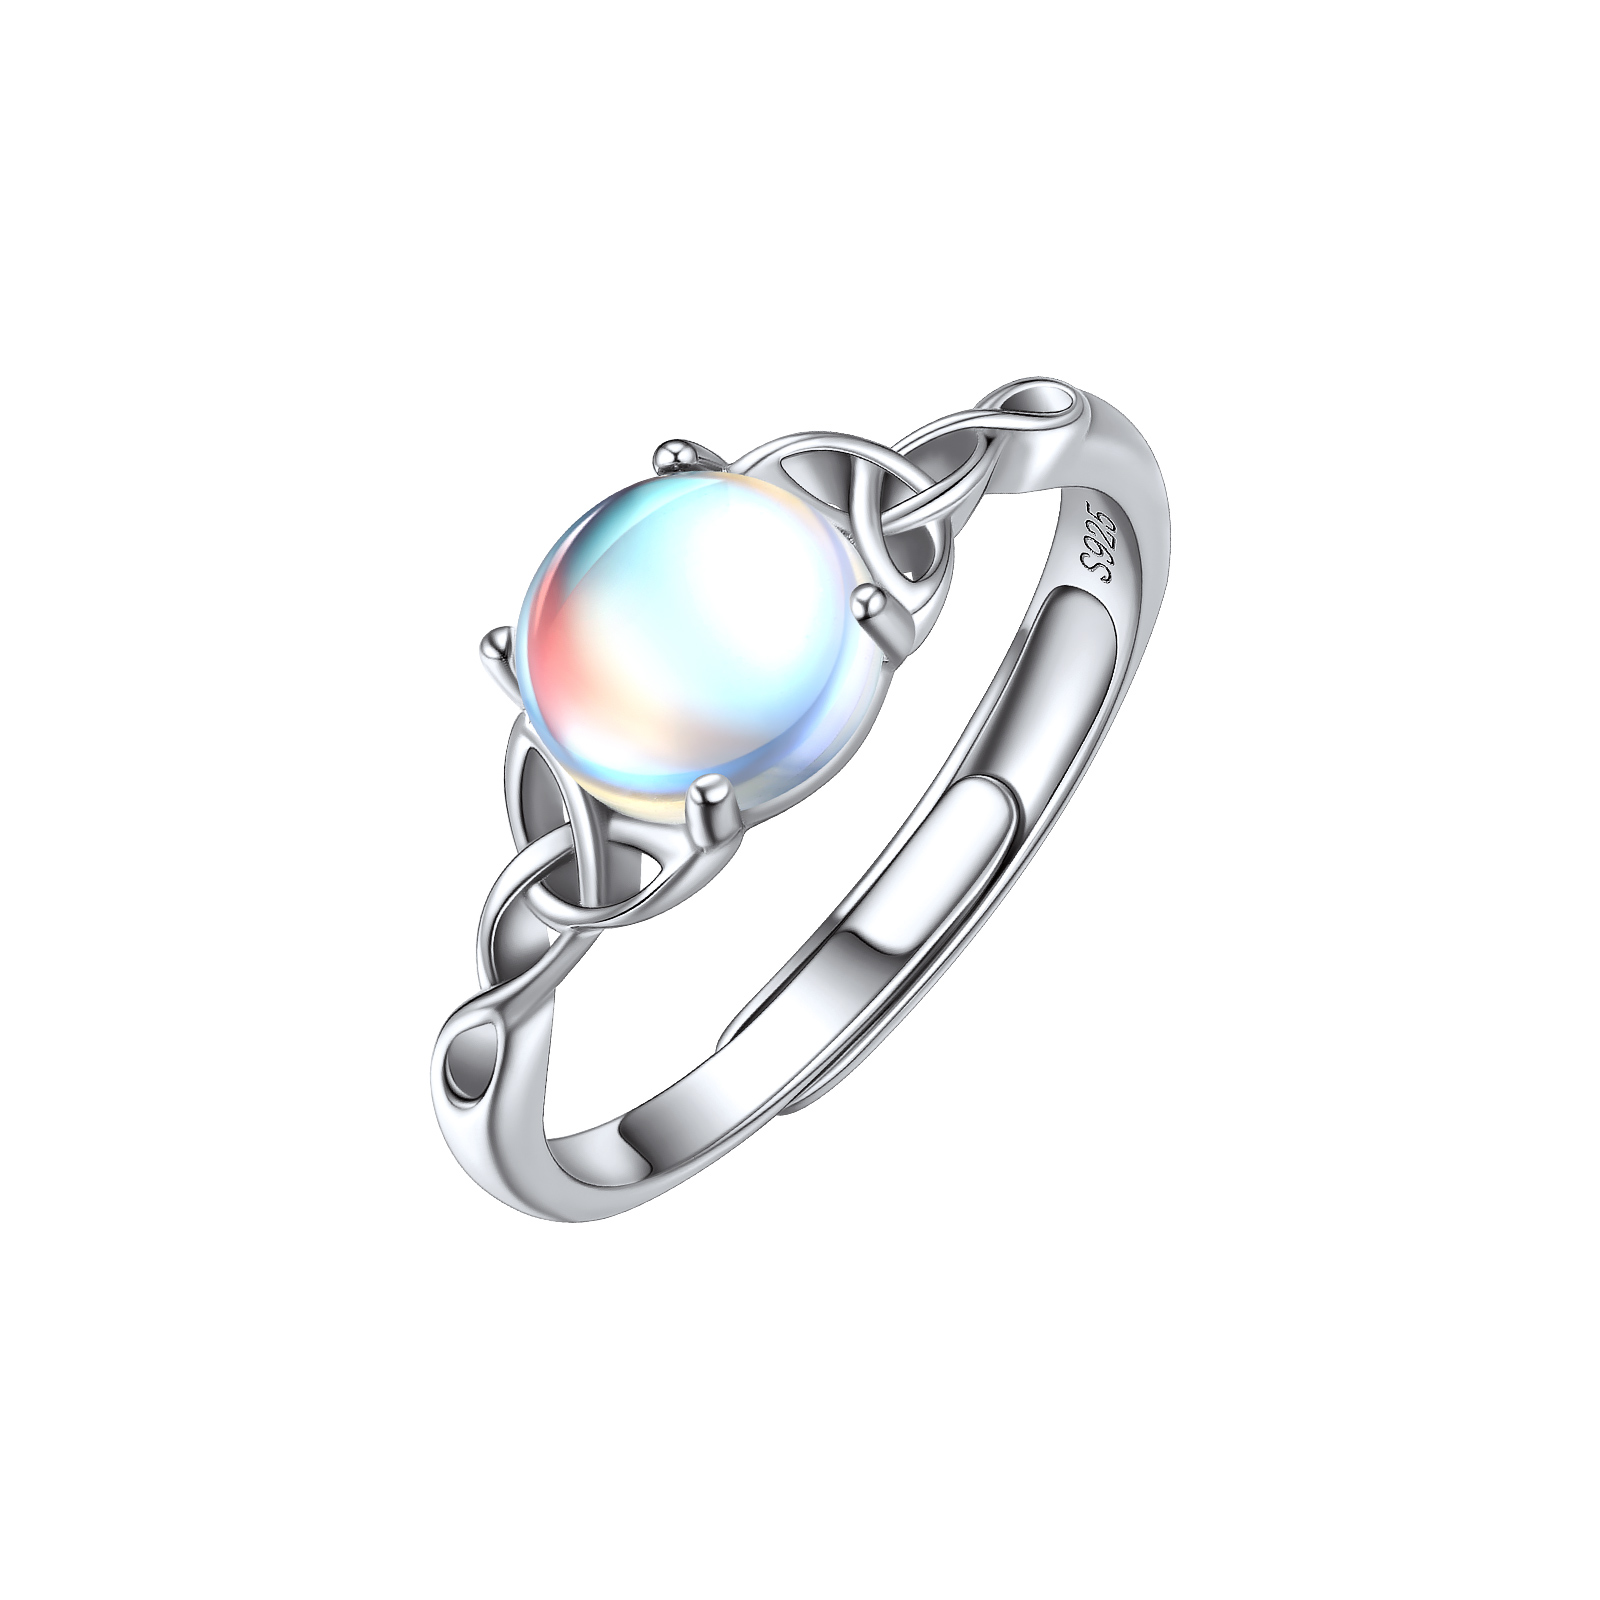 ChicSilver Sterling Silver Celtic Knot Moonstone Ring